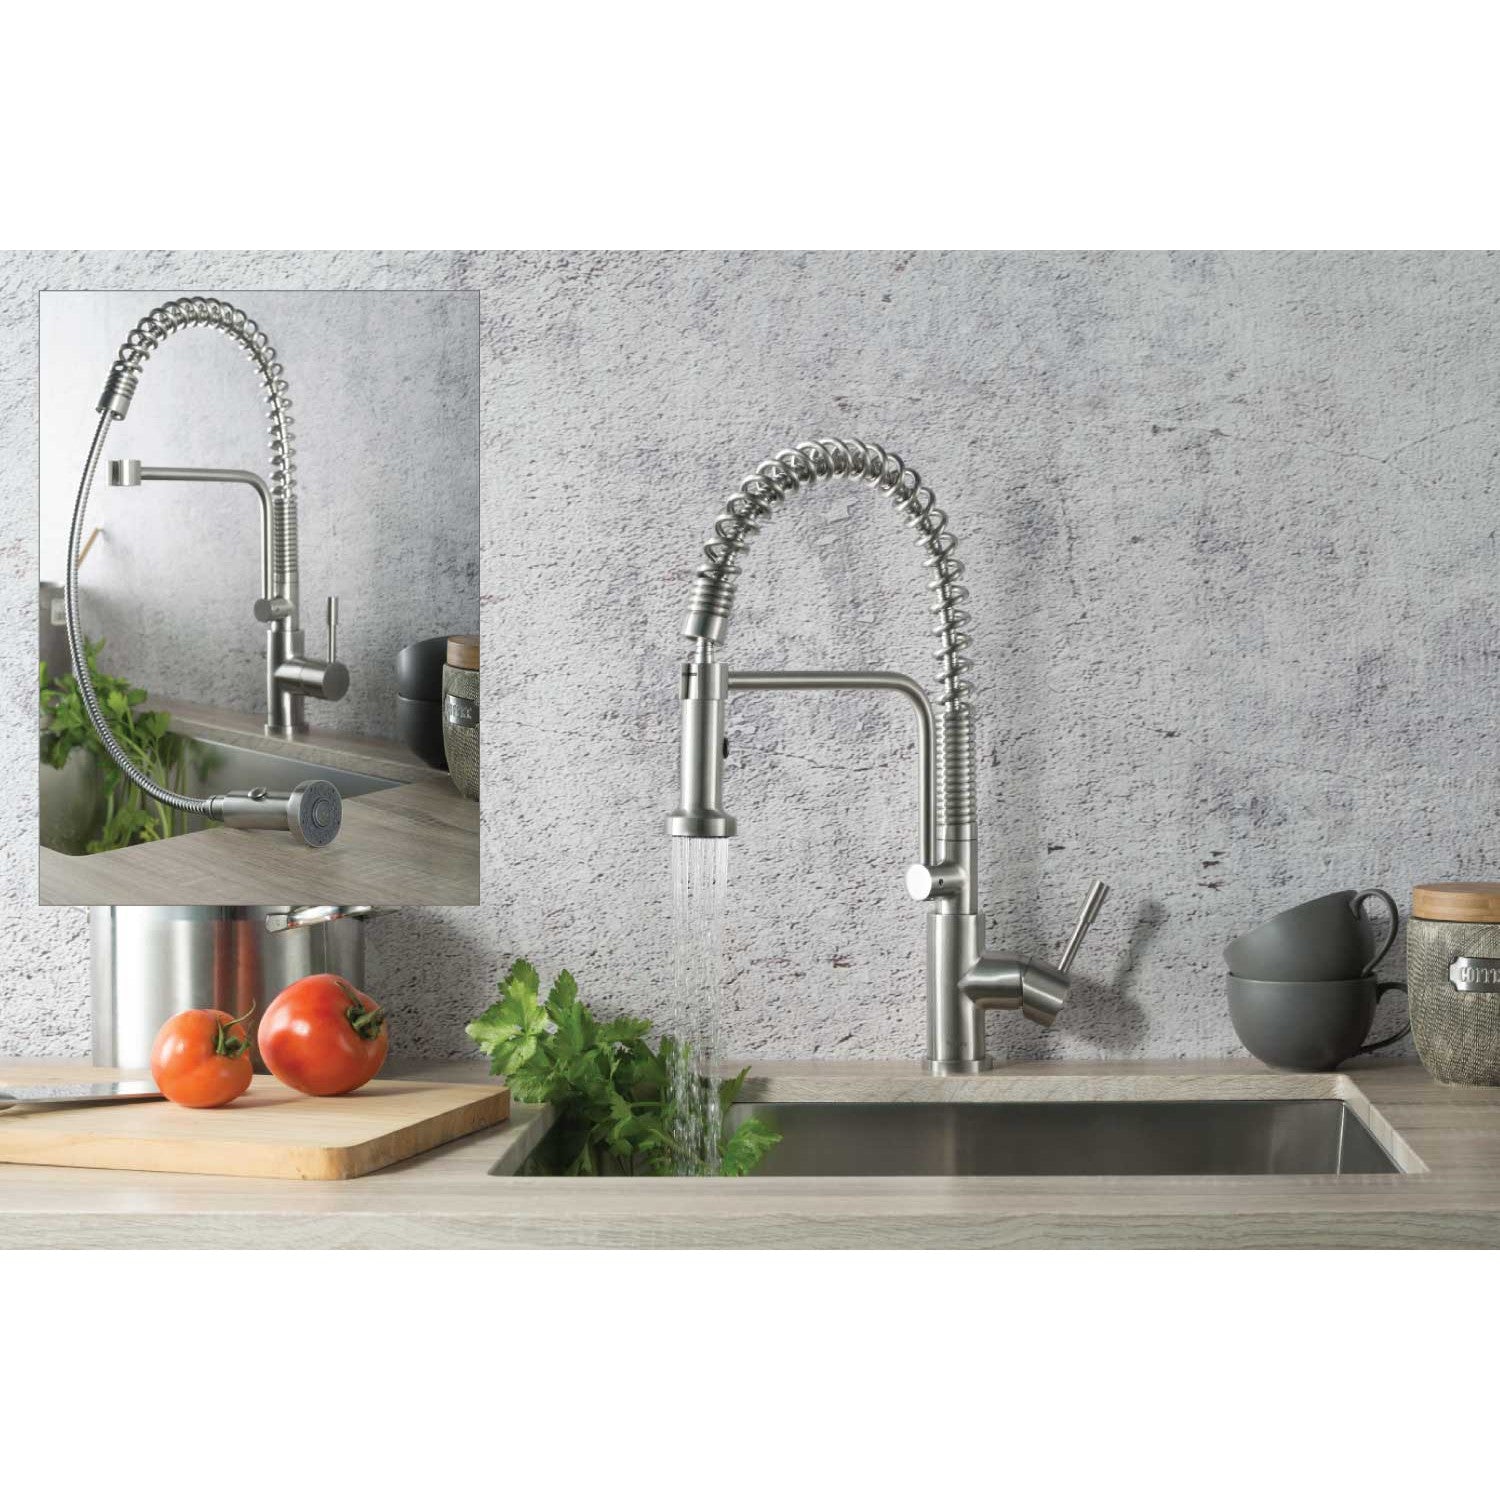 Isenberg Klassiker Caso 19" Single Hole Navy Blue Semi-Professional Stainless Steel Pull-Down Kitchen Faucet With Dual Function Sprayer